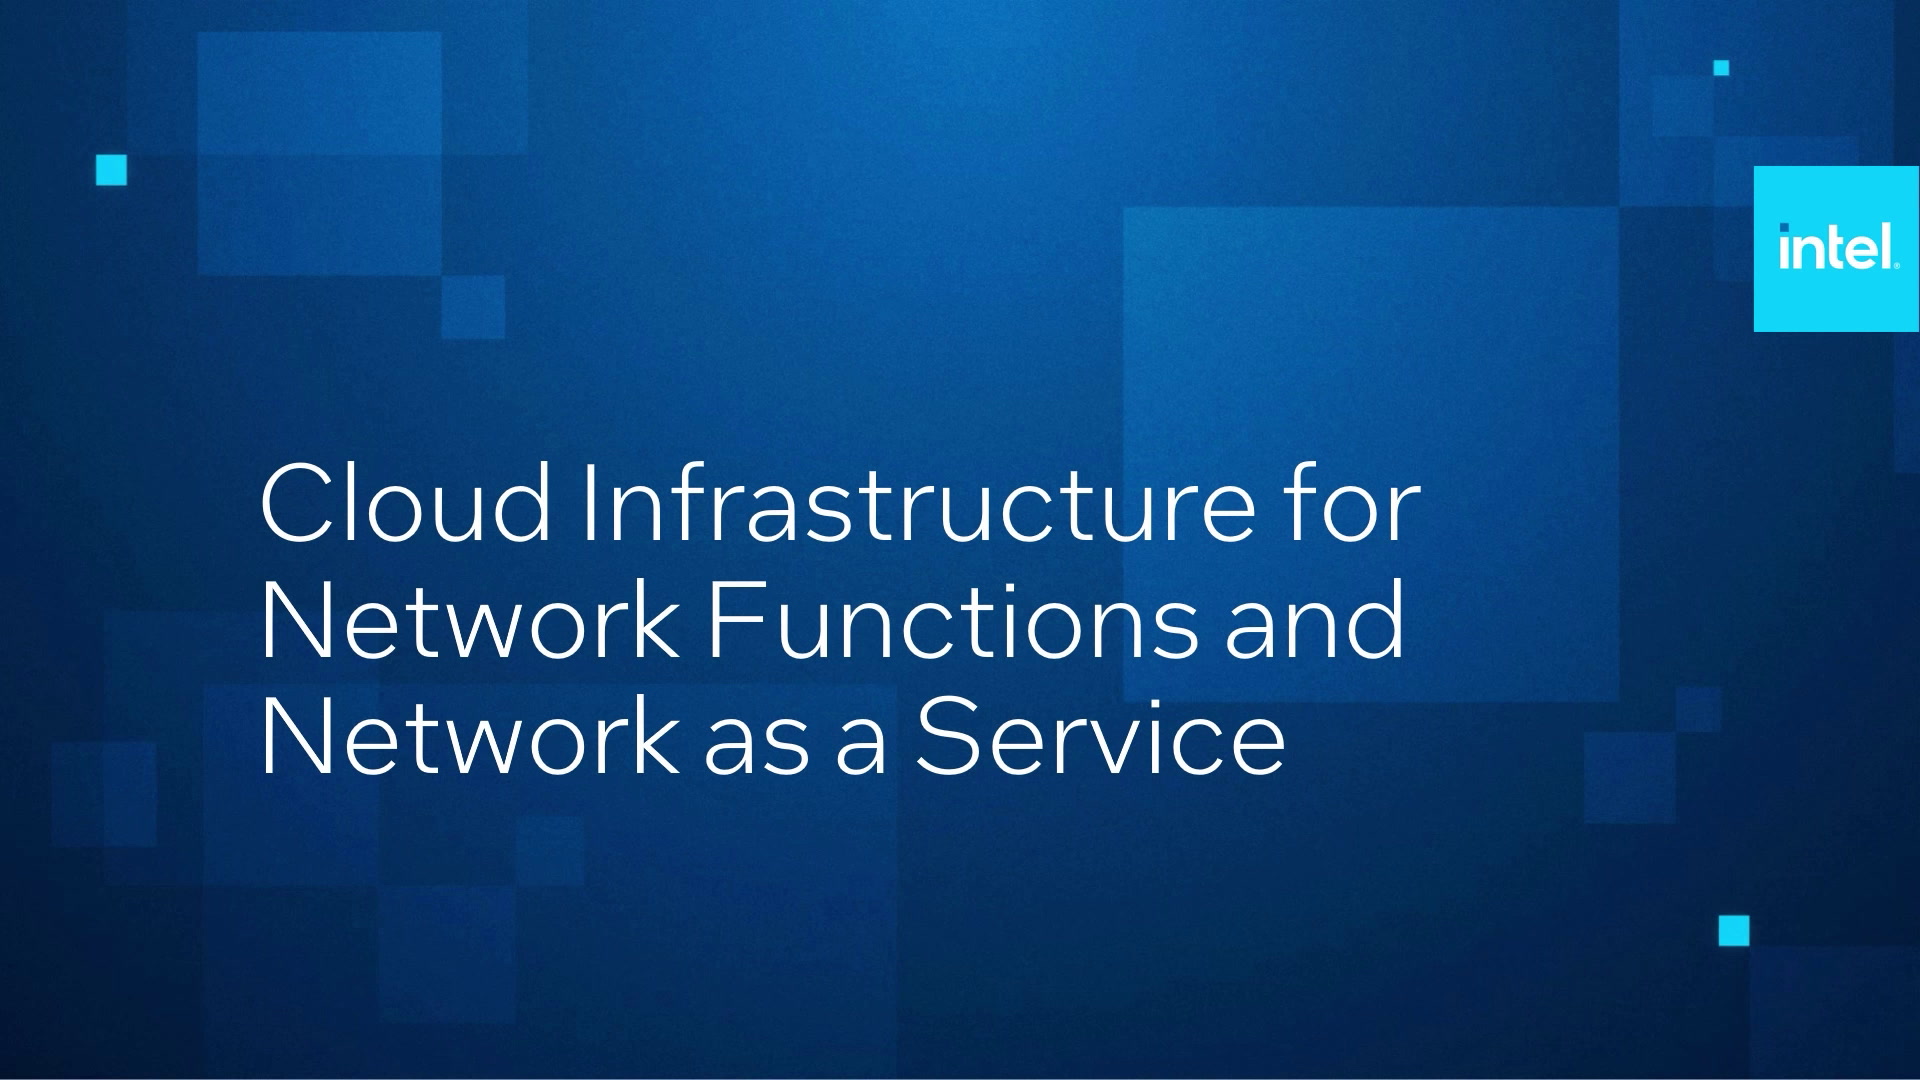 Chapter 1: Opportunities Created by a Cloud Infrastructure